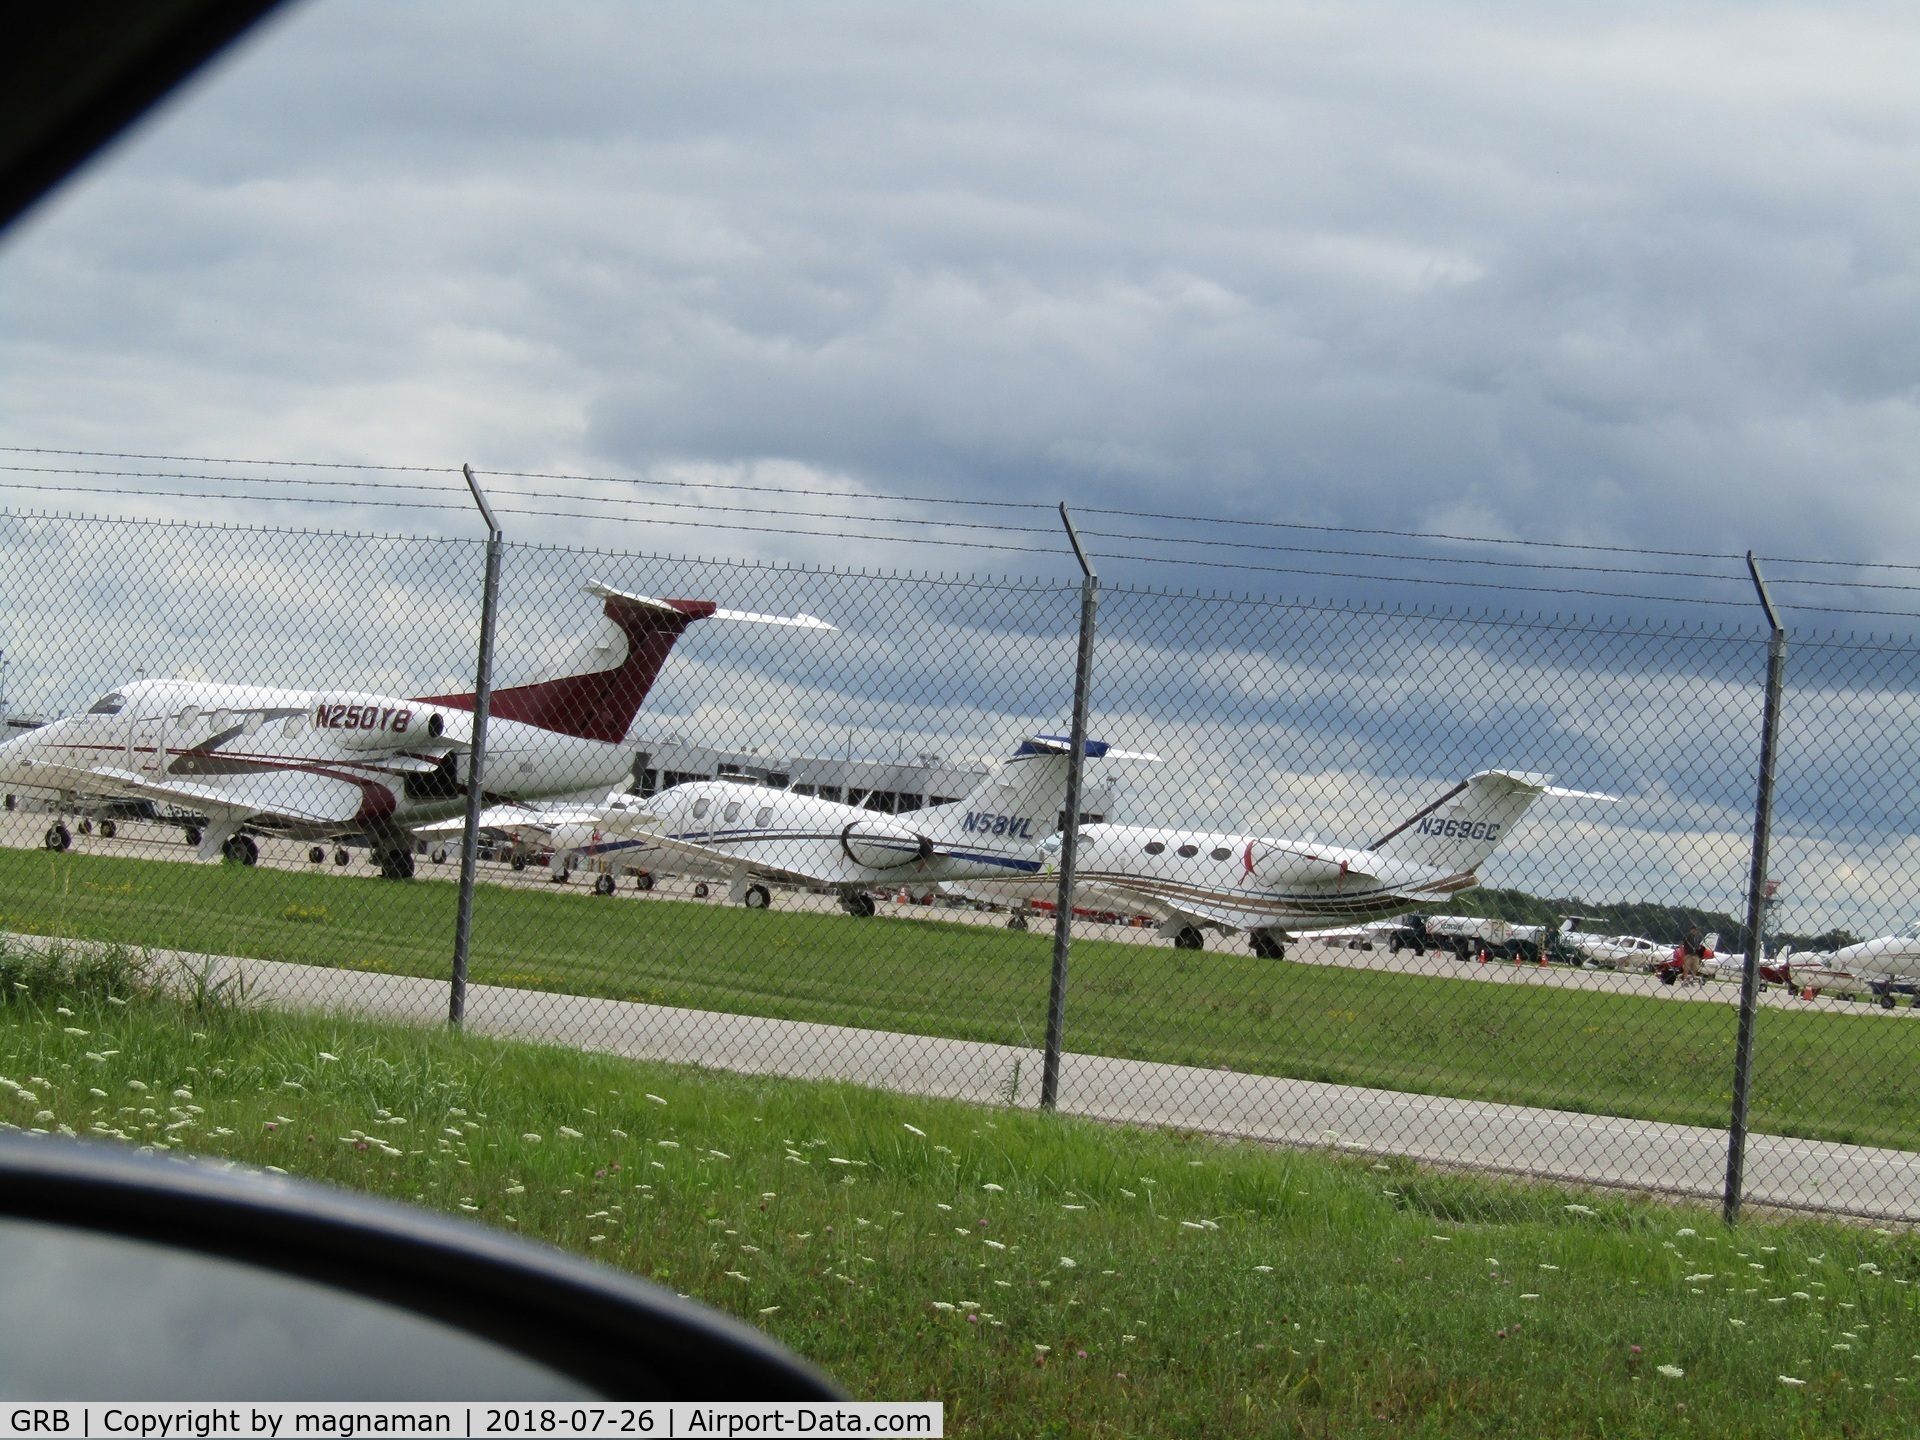 Austin Straubel International Airport (GRB) - crowded apron from side road